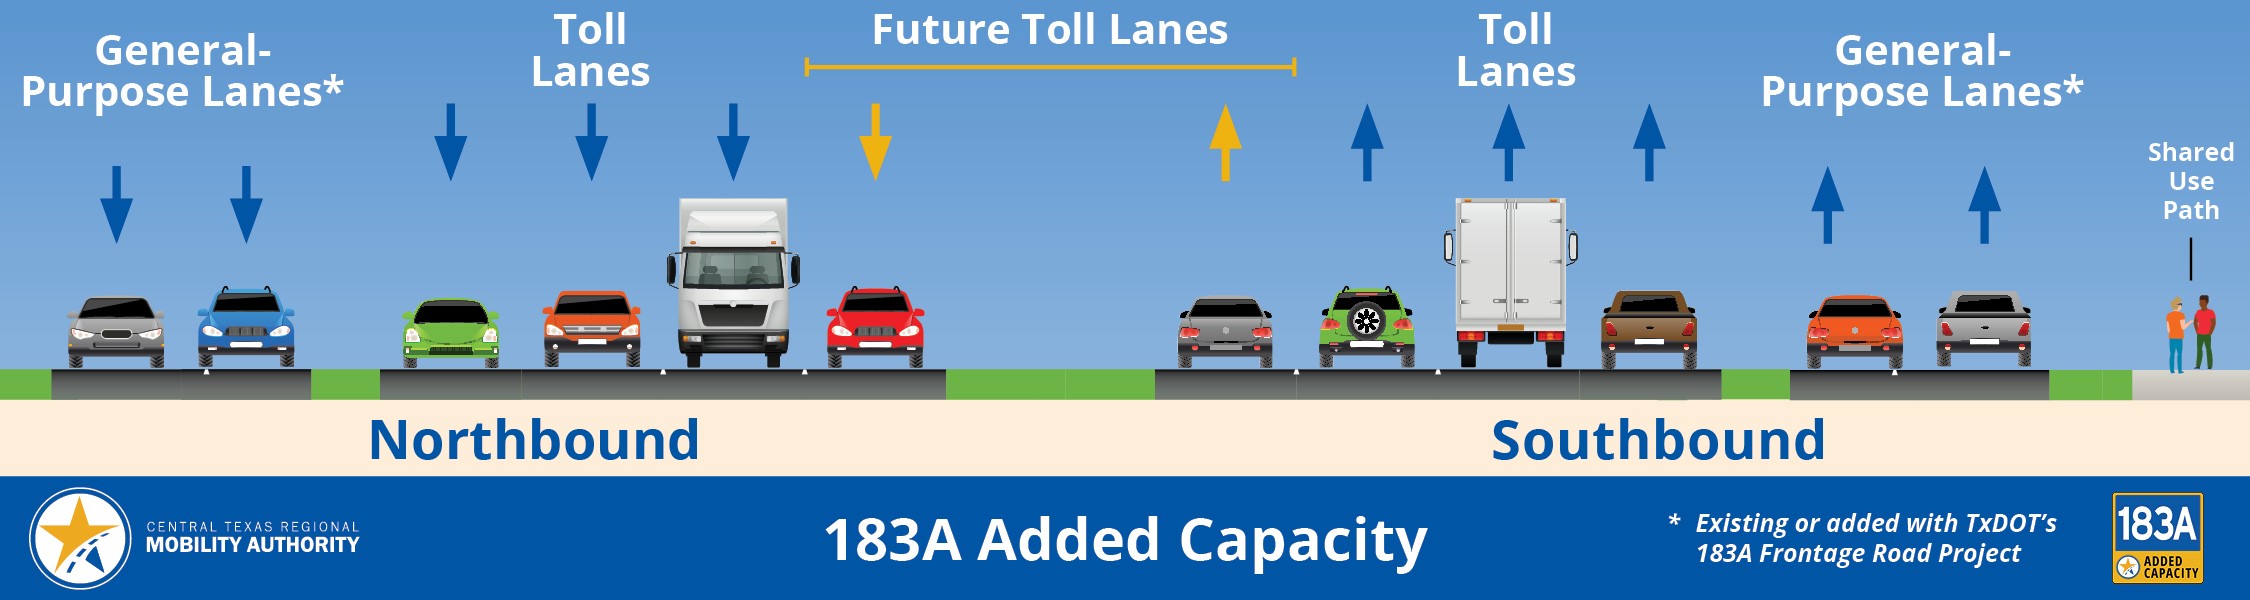 Graphic depicting future toll lanes in relation to other lanes